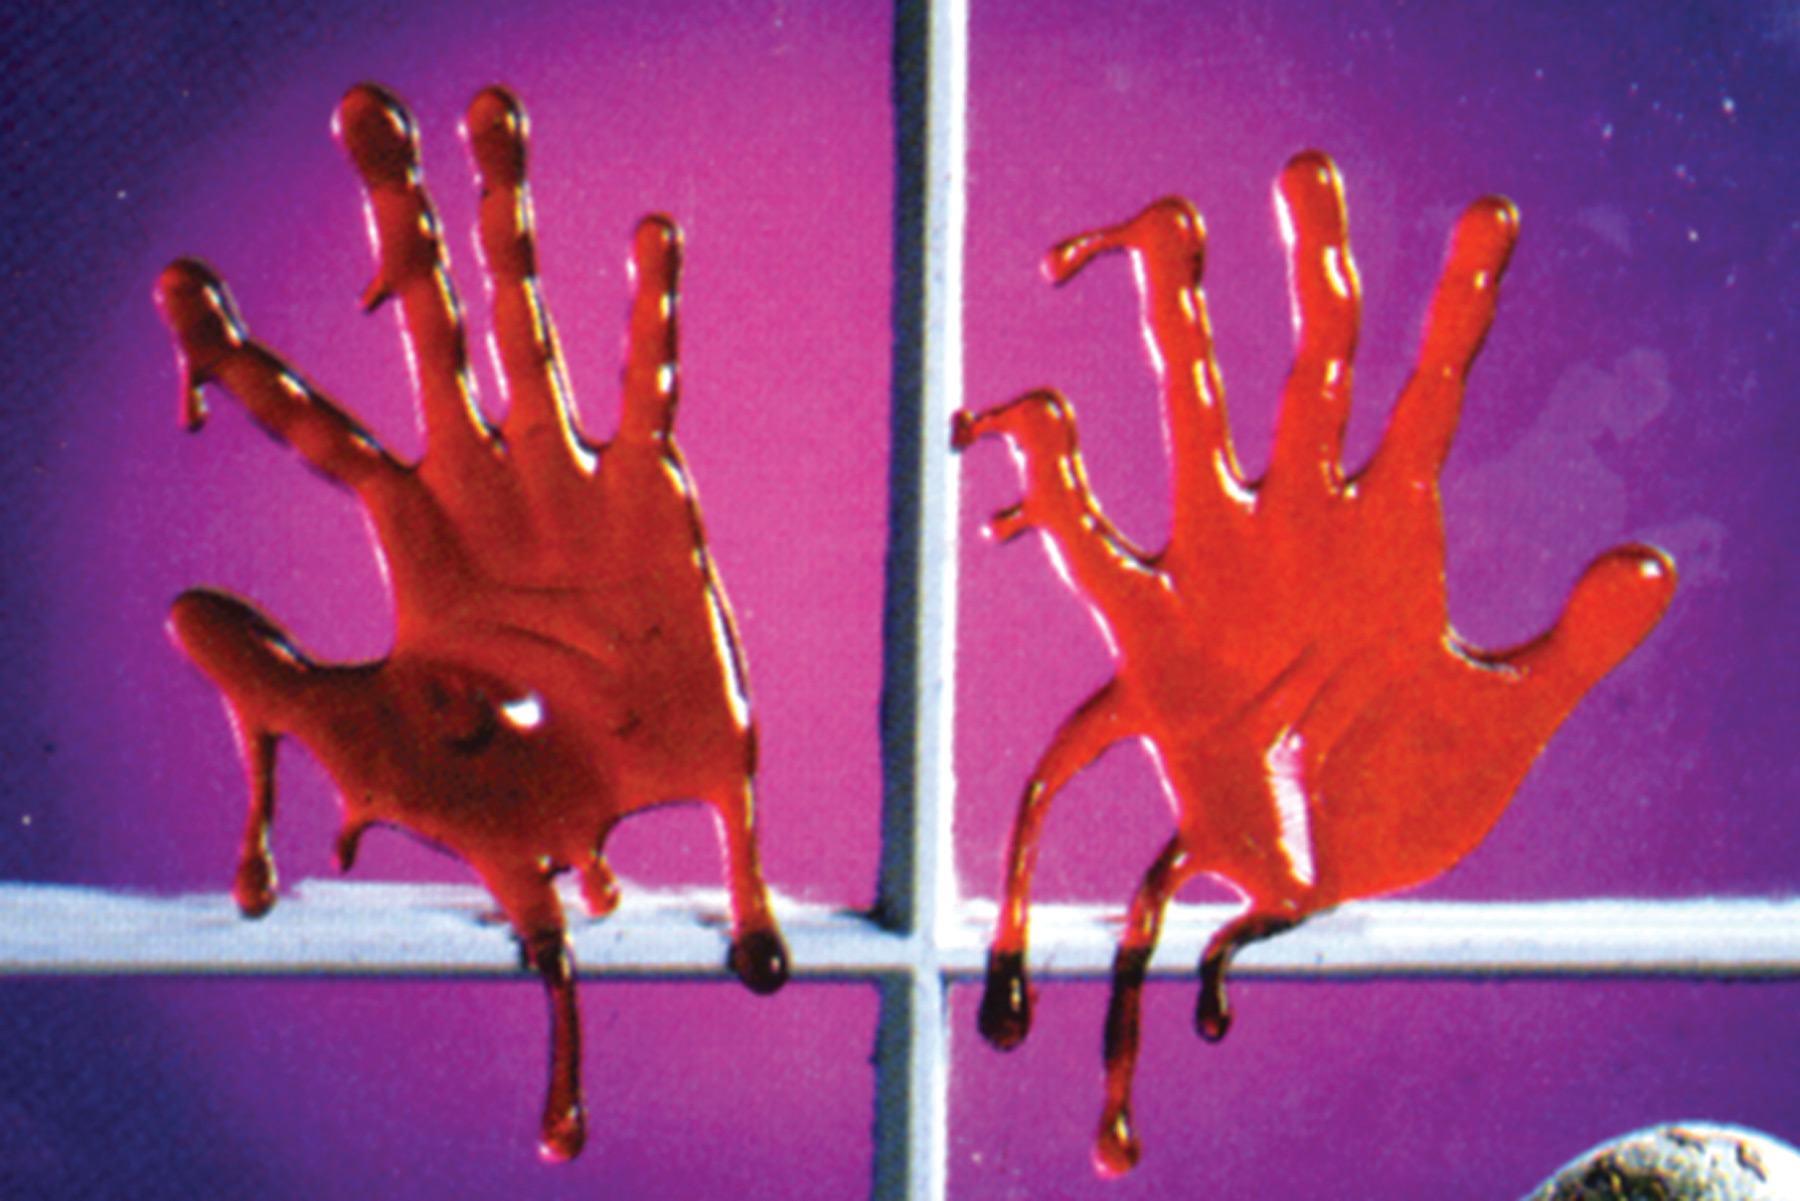 DRIPS OF BLOOD HAND STYLE